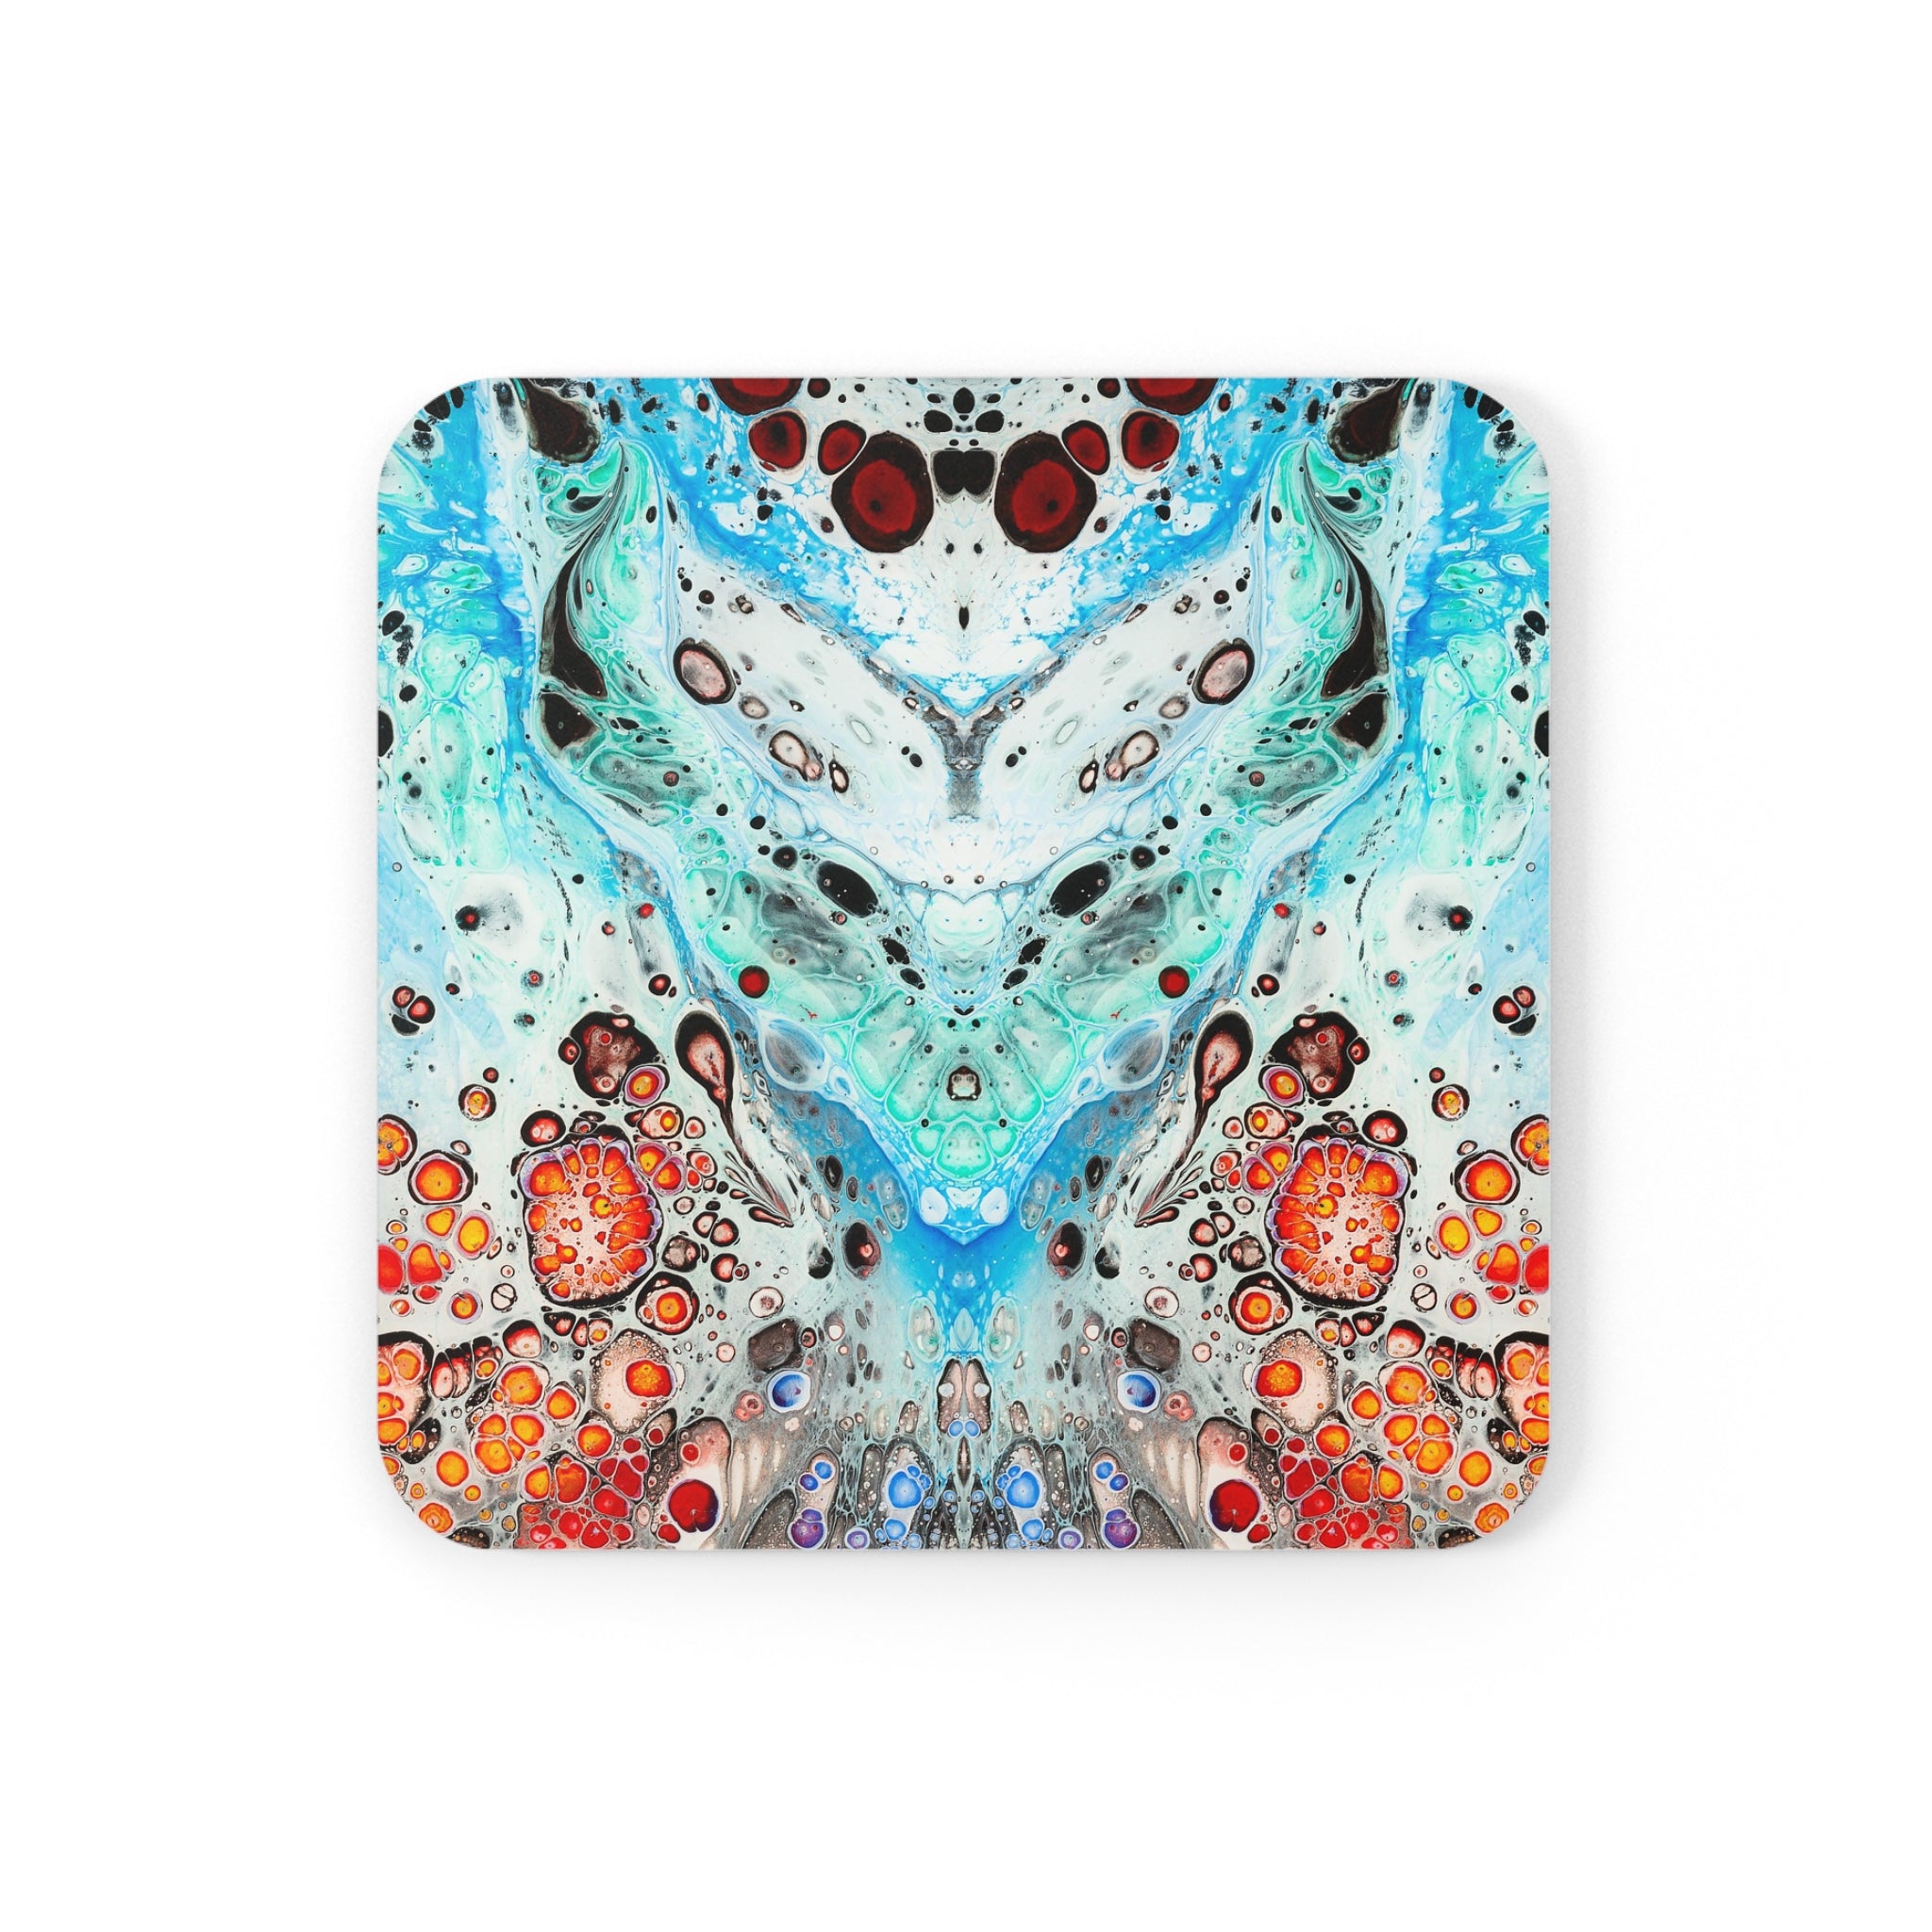 Cameron Creations - Surface Of Teita - Stylish Coffee Coaster - Square Front